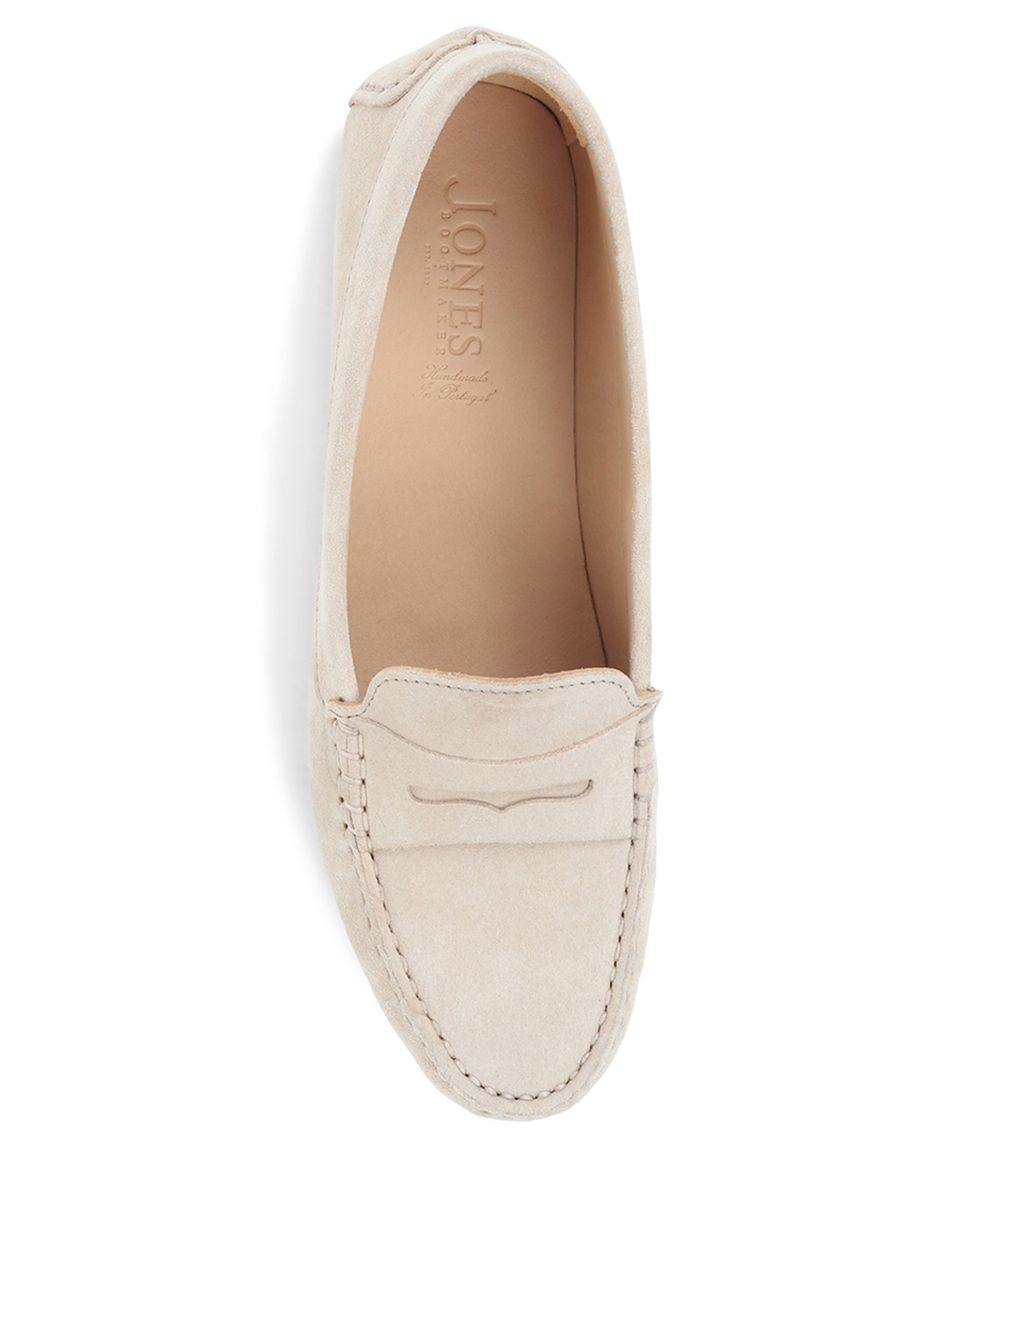 Suede Slip On Loafers image 5